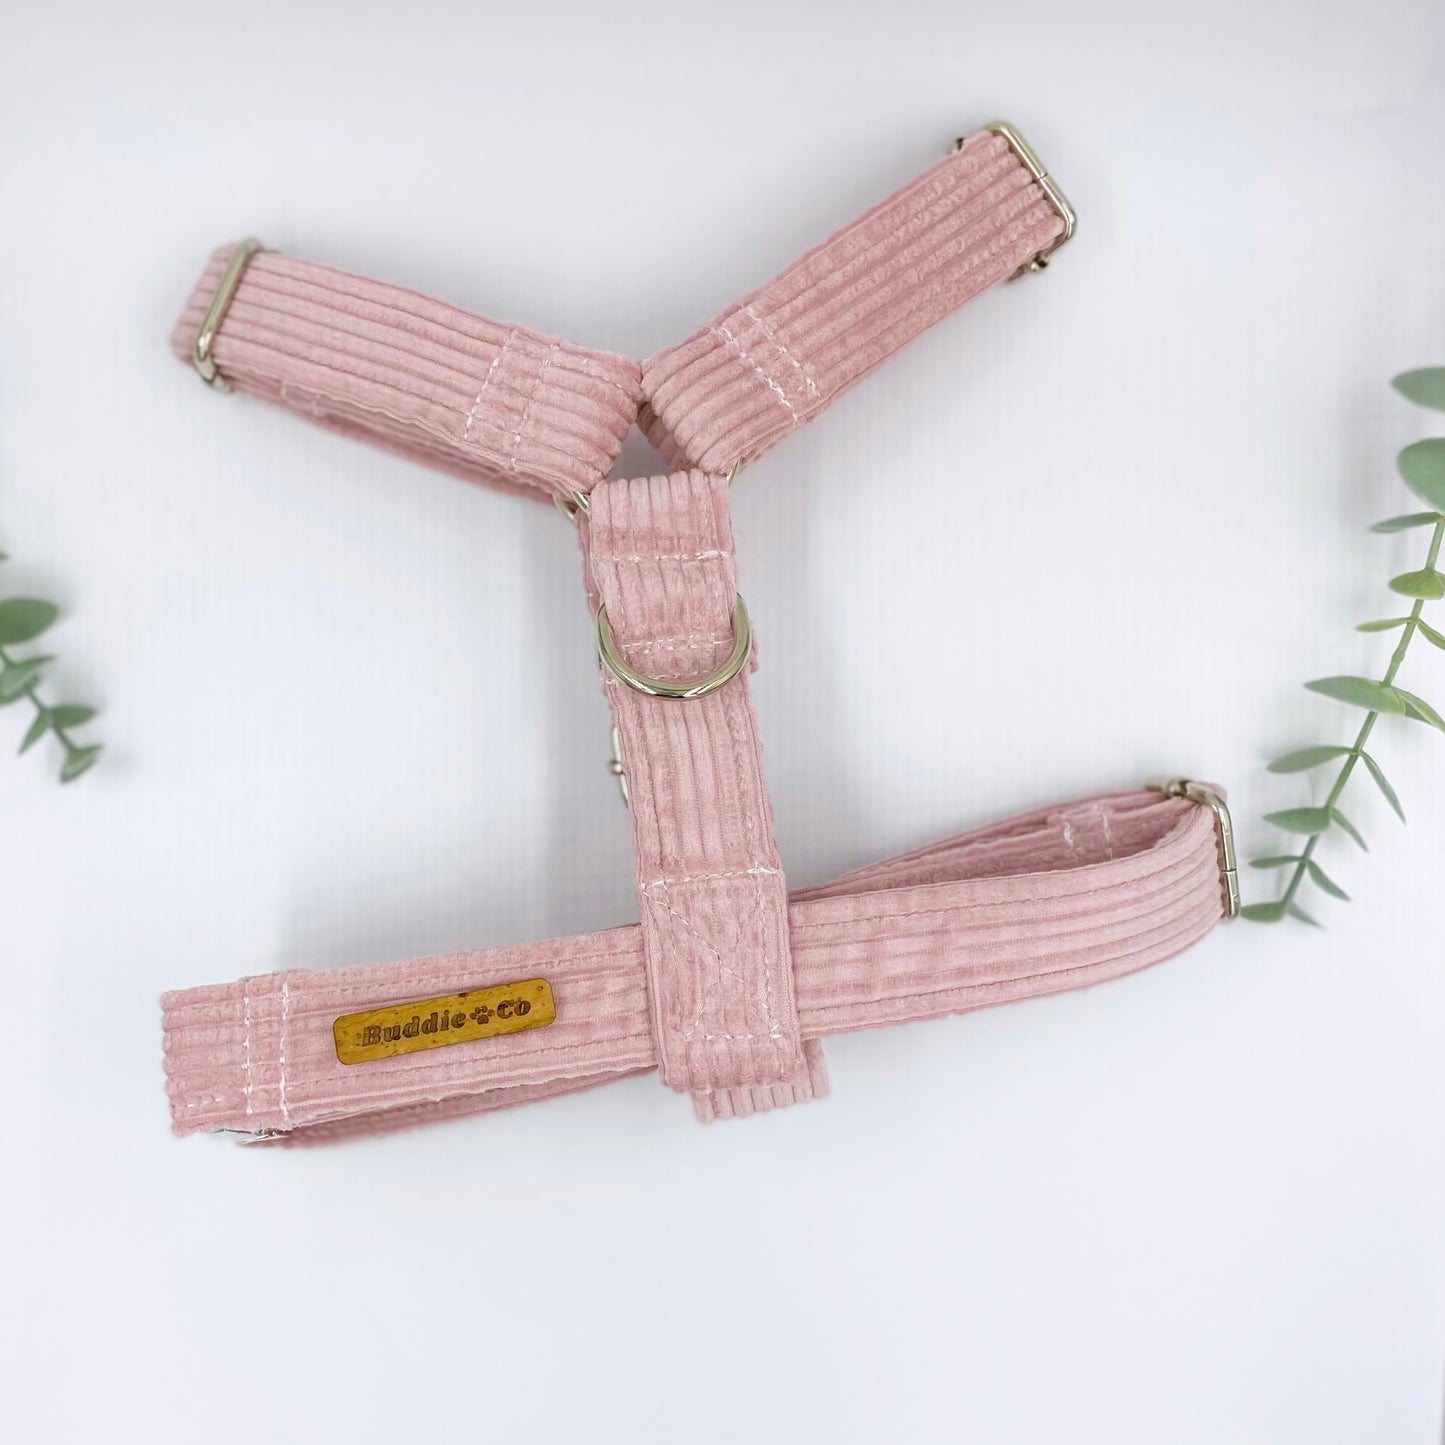 The 'Chelsea' Strap Harness